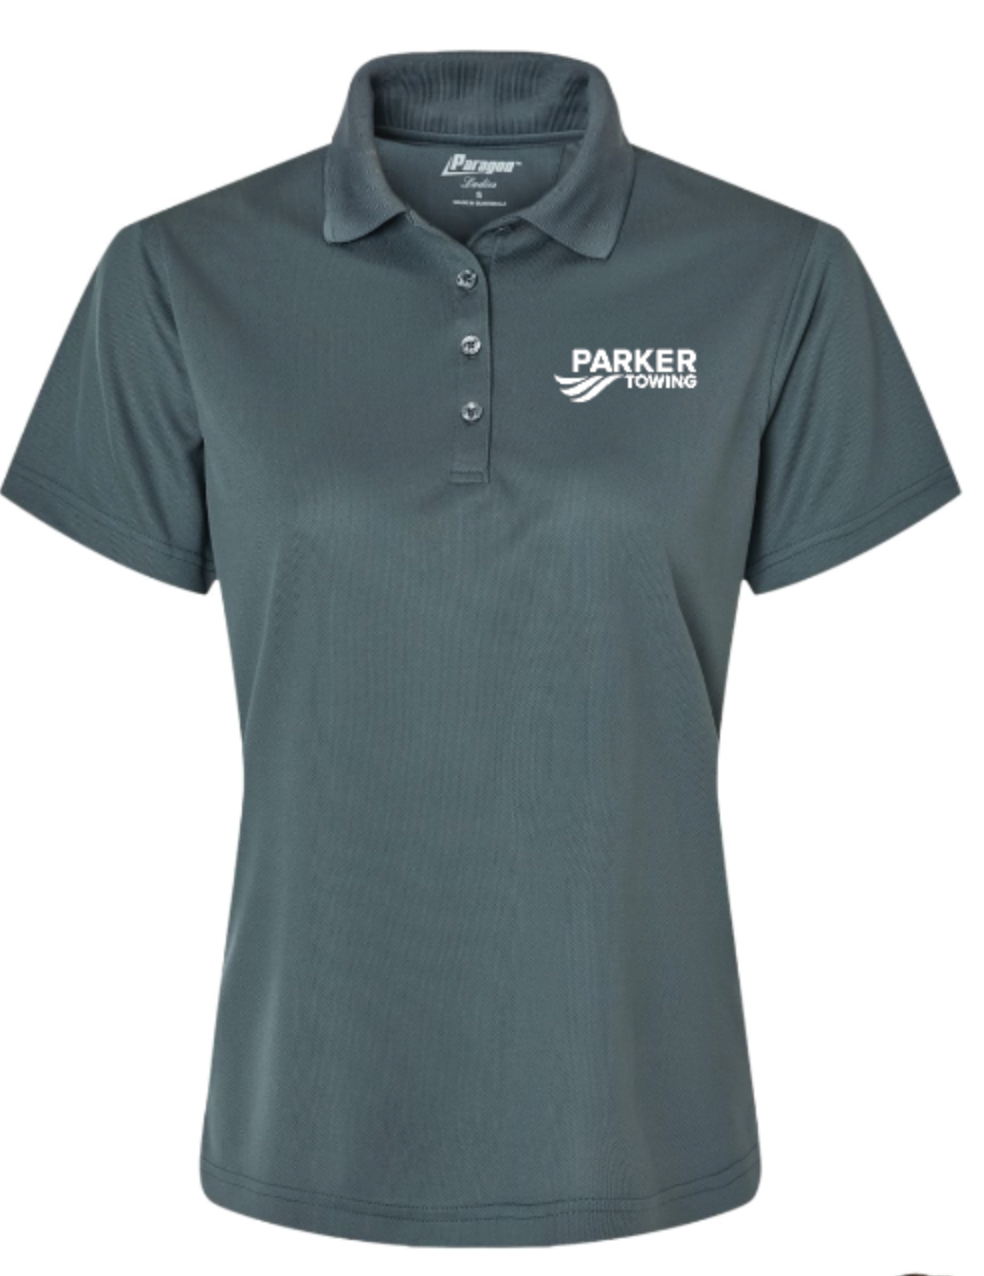 PARKER TOWING PARAGON WOMENS POLO